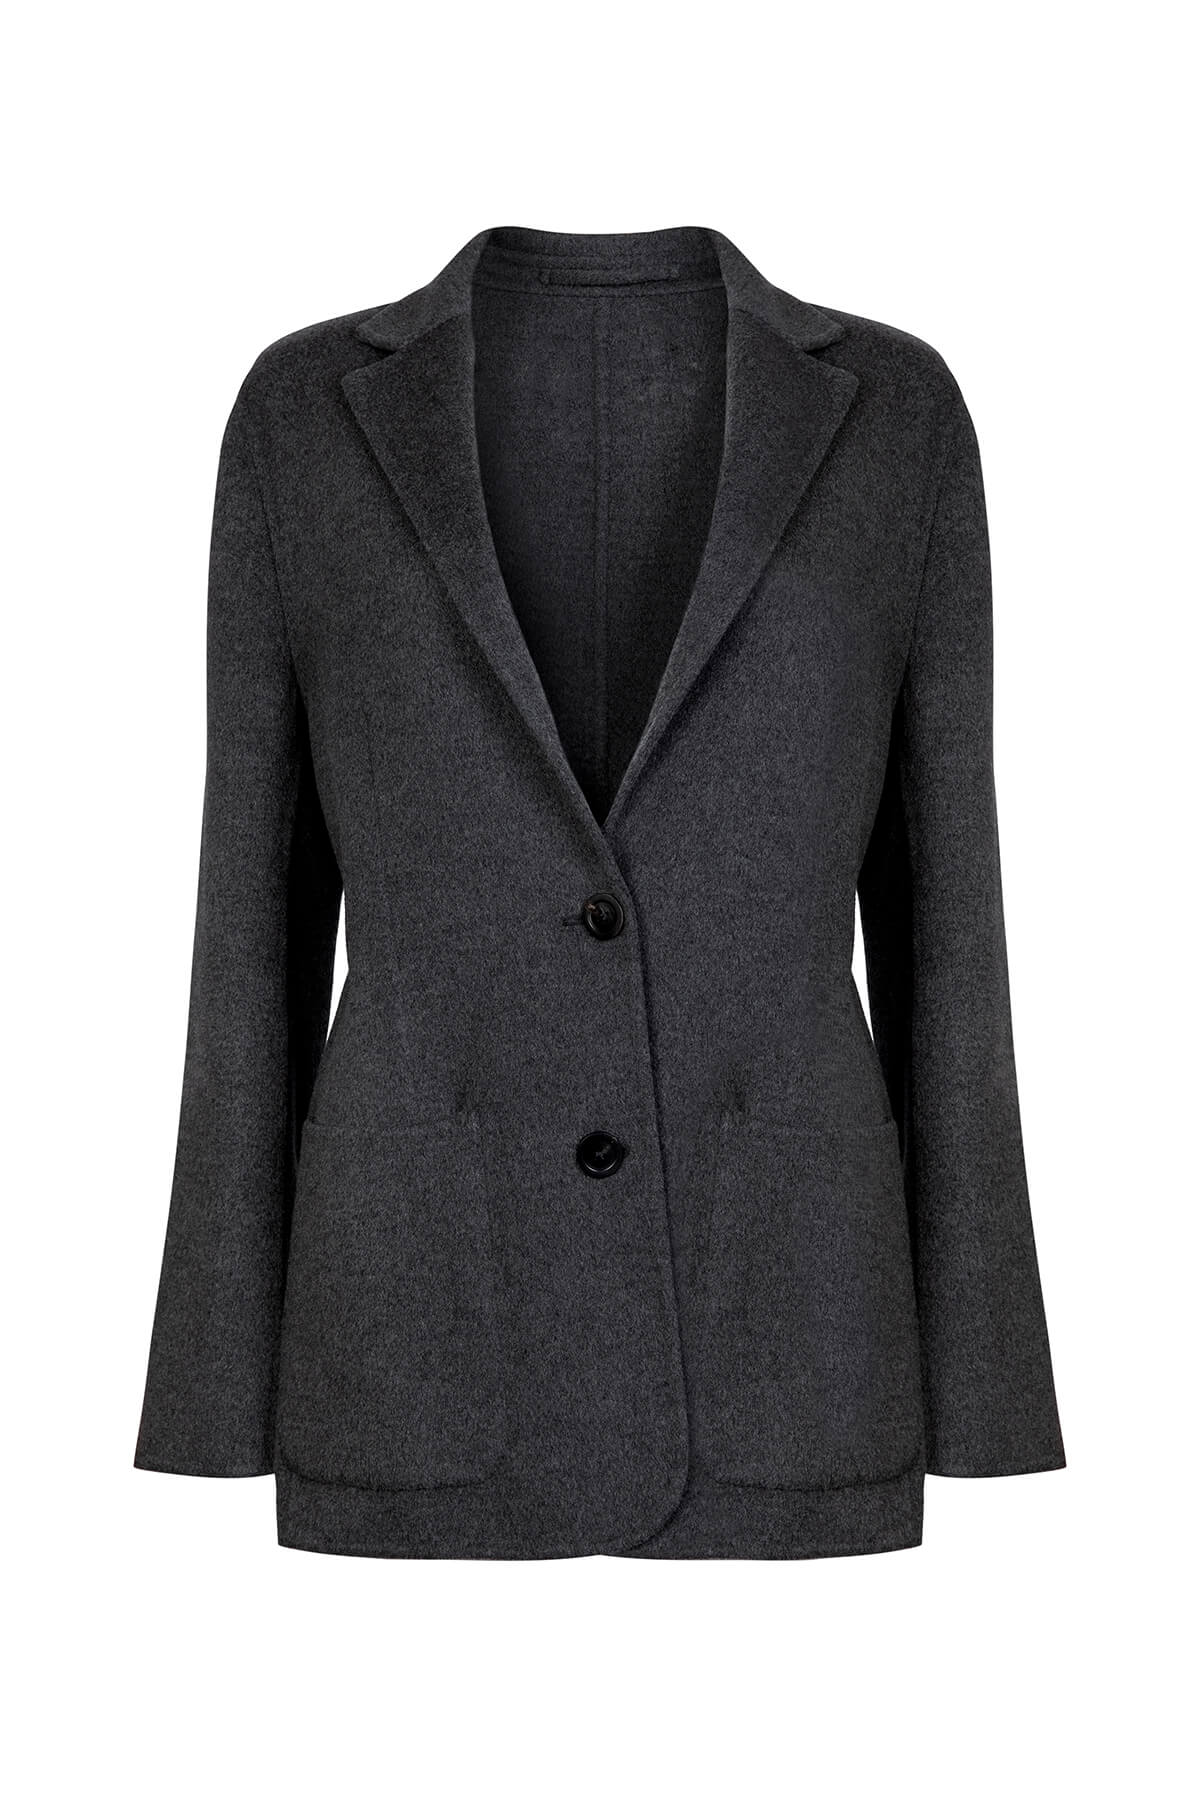 Johnstons of Elgin Women's Cashmere Double Face Boyfriend Jacket in Charcoal on a white background TA000518RU6081